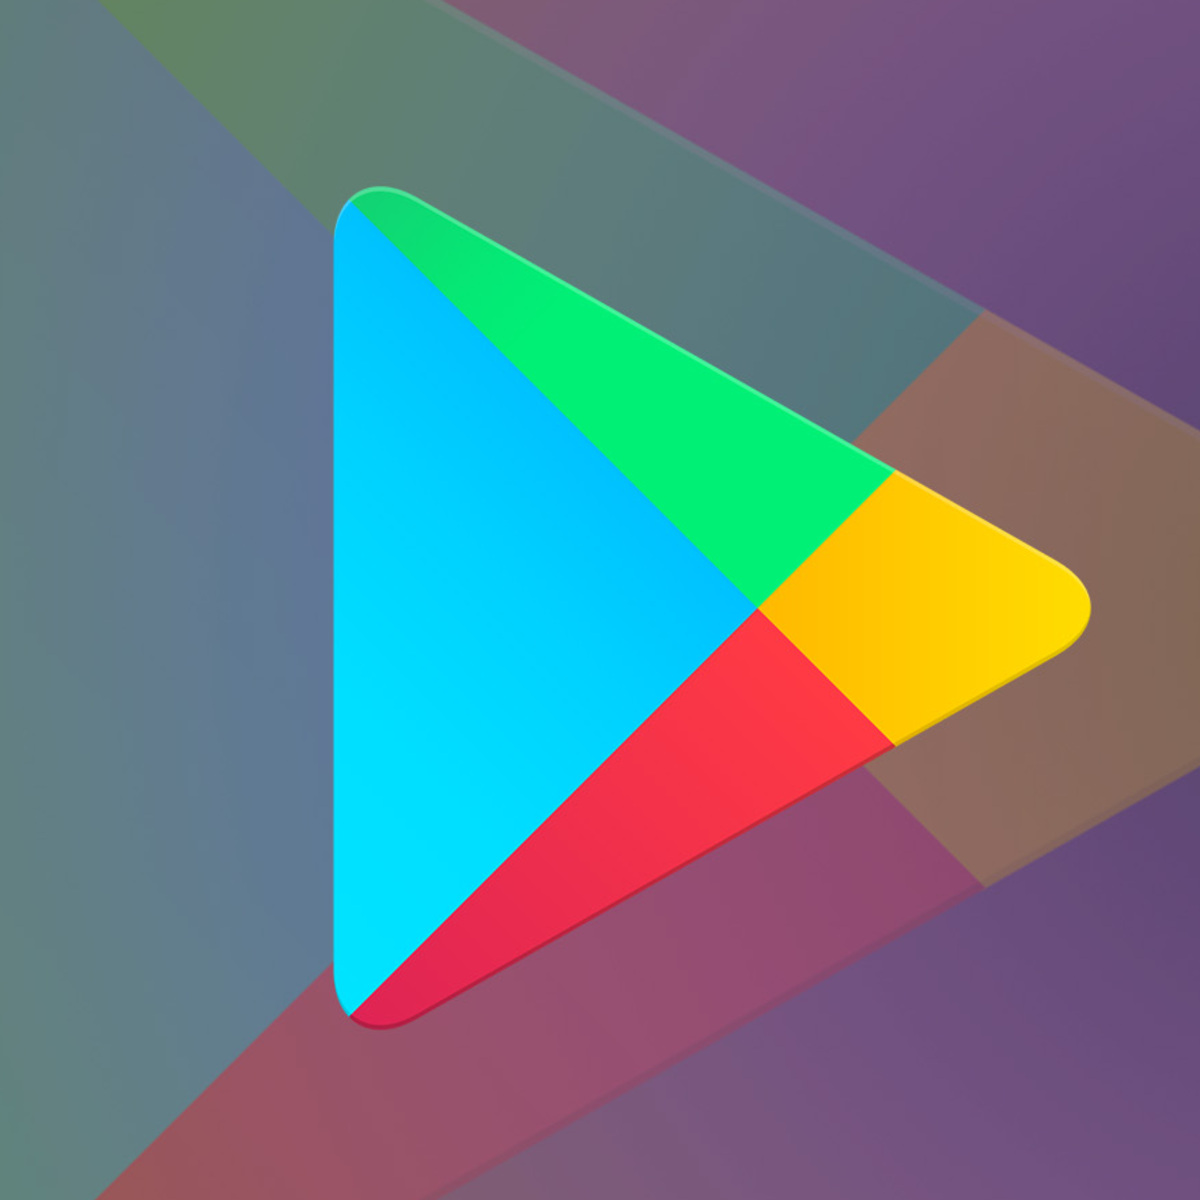 google play store update apps free download